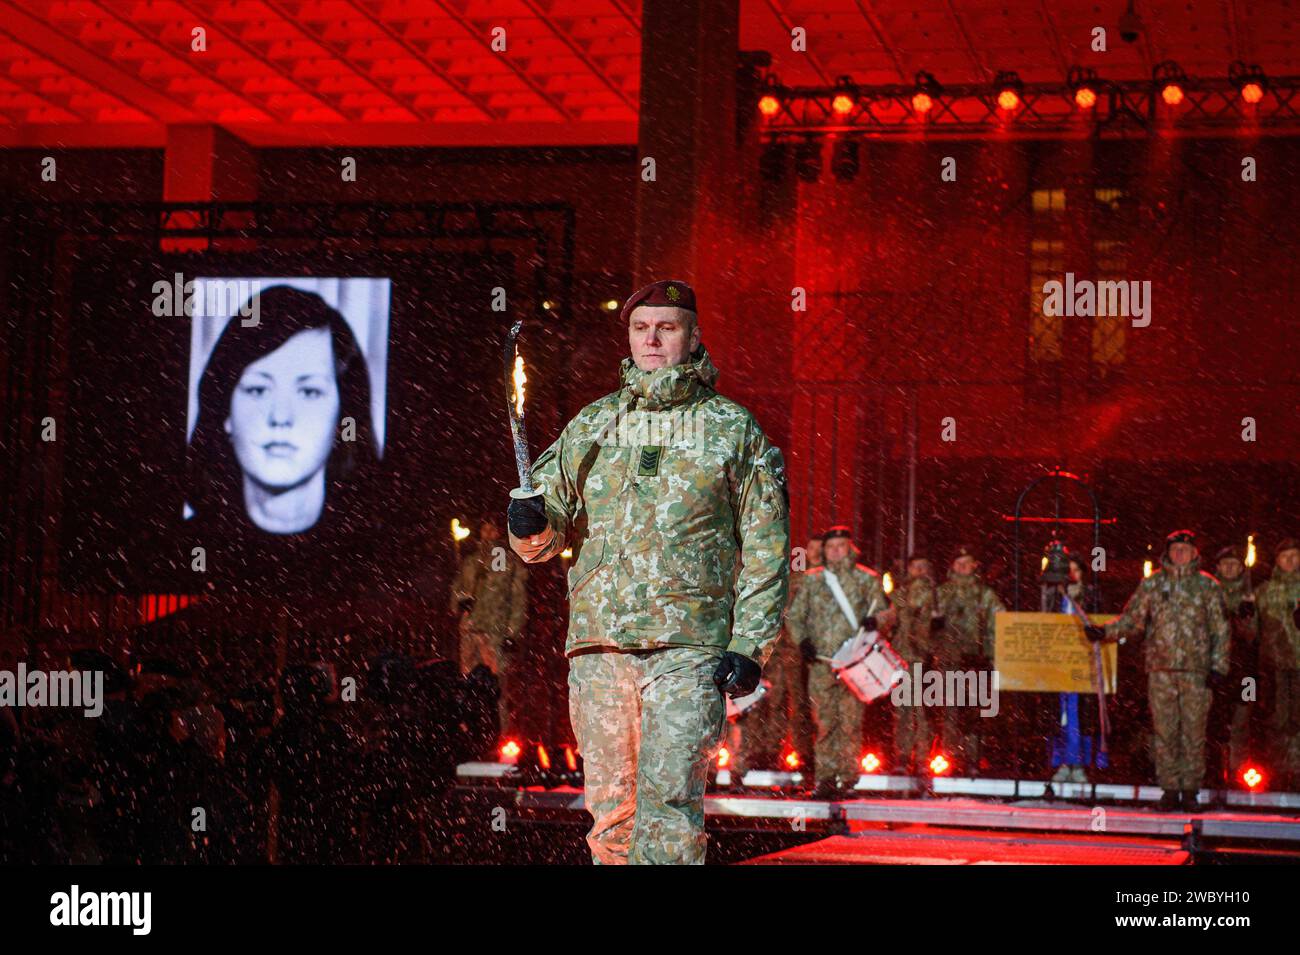 Lithuanian soldier holds a torch to light a bonfire at the Independence Square near the Lithuanian Parliament building on the eve of the 33rd anniversary of the Day of the Defenders of Freedom in Vilnius. People gathered around the bonfire to remember the victims of assault by Soviet troops on the television center in Vilnius in 1991. The incident resulted in 14 deaths with many injured. The ceremonial lighting of bonfires took place near the Vilnius TV tower and at Independence Square. (Photo by Yauhen Yerchak/SOPA Images/Sipa USA) Stock Photo